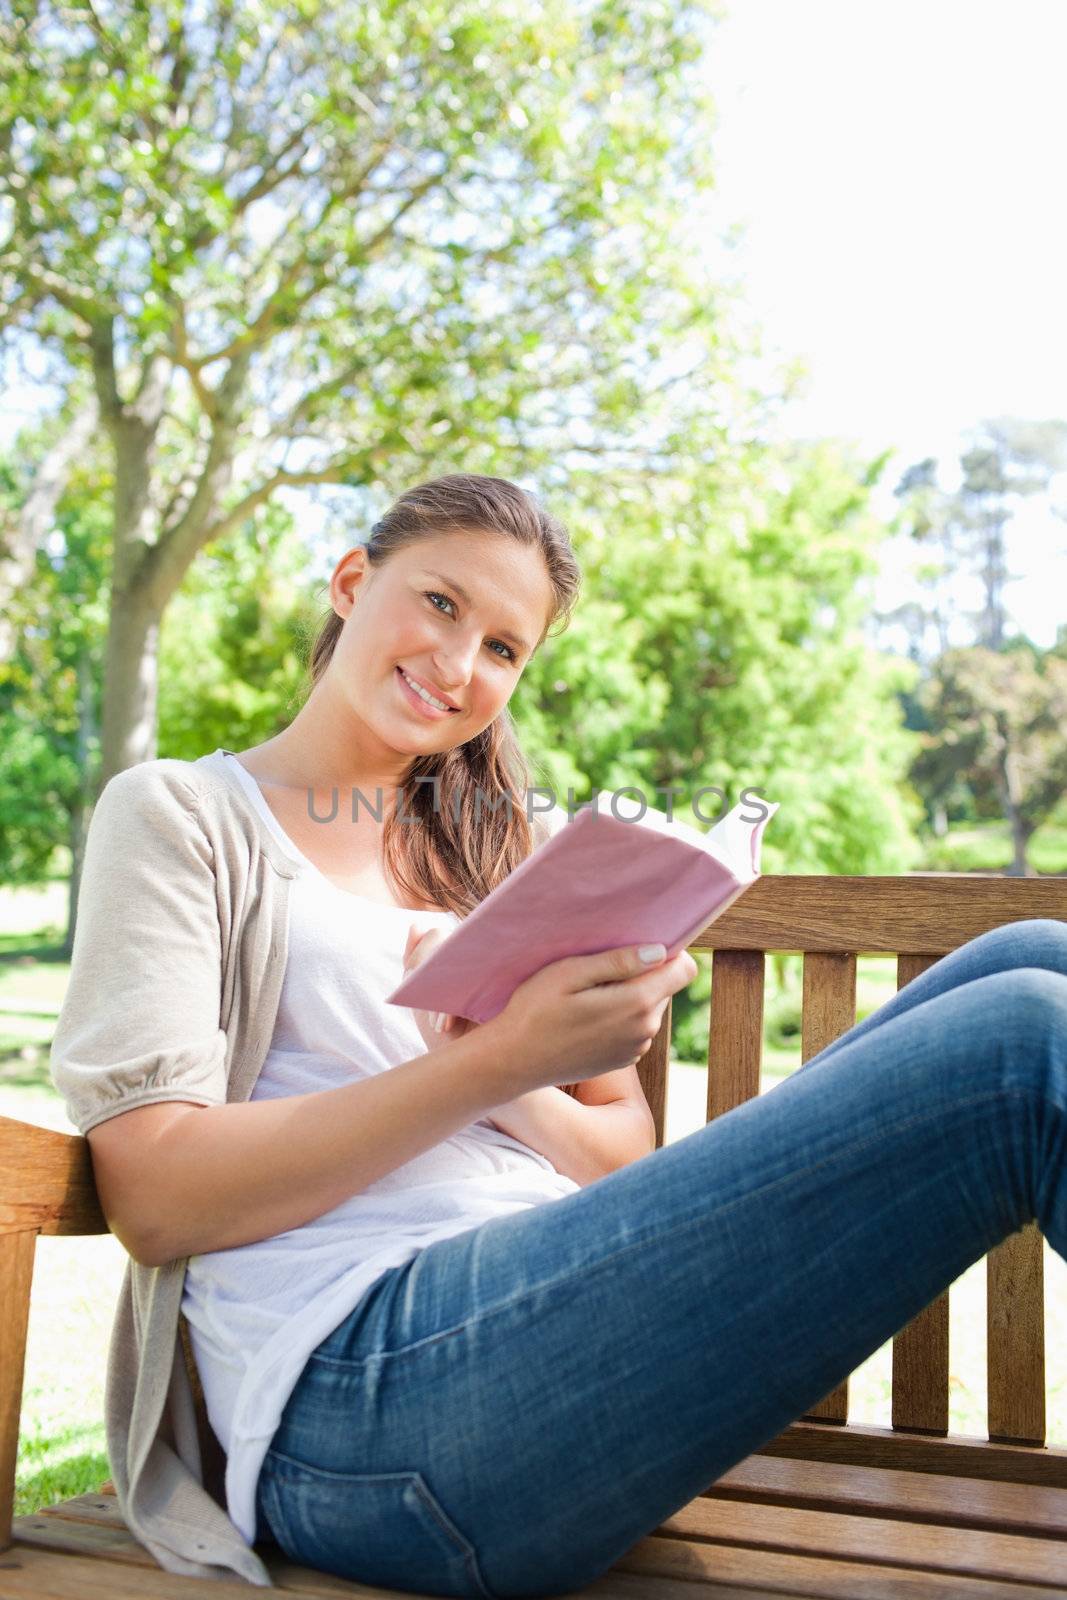 Smiling young woman sitting on a bench in the park with a book